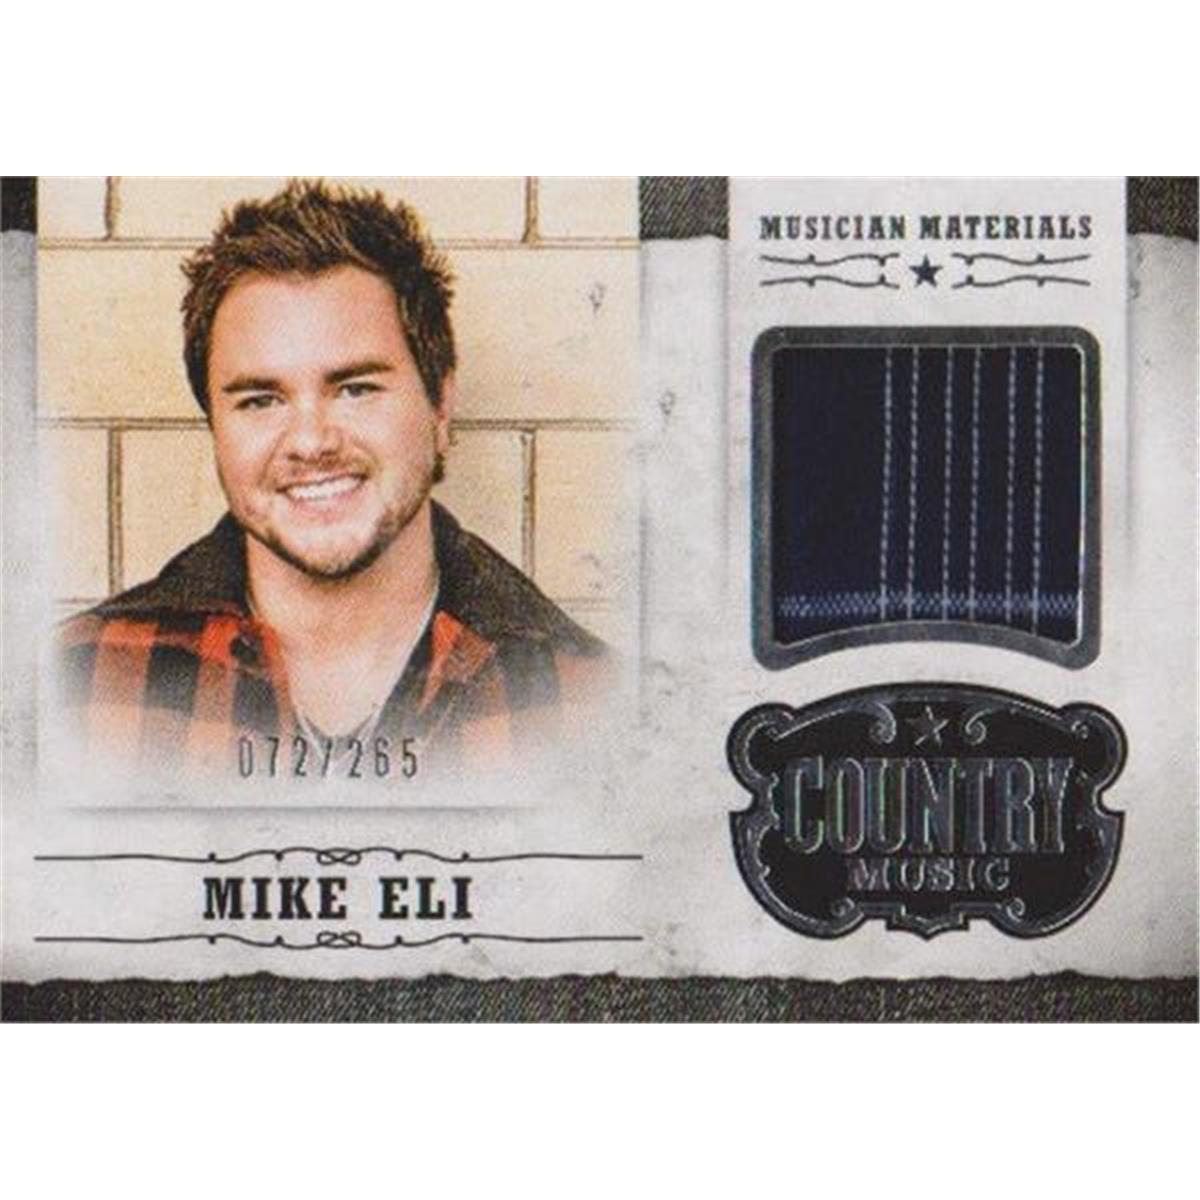 Picture of Autograph Warehouse 409075 Mike Eli Musician Worn Material Relic Patch Trading Card - 2014 Panini MME LE 72-265